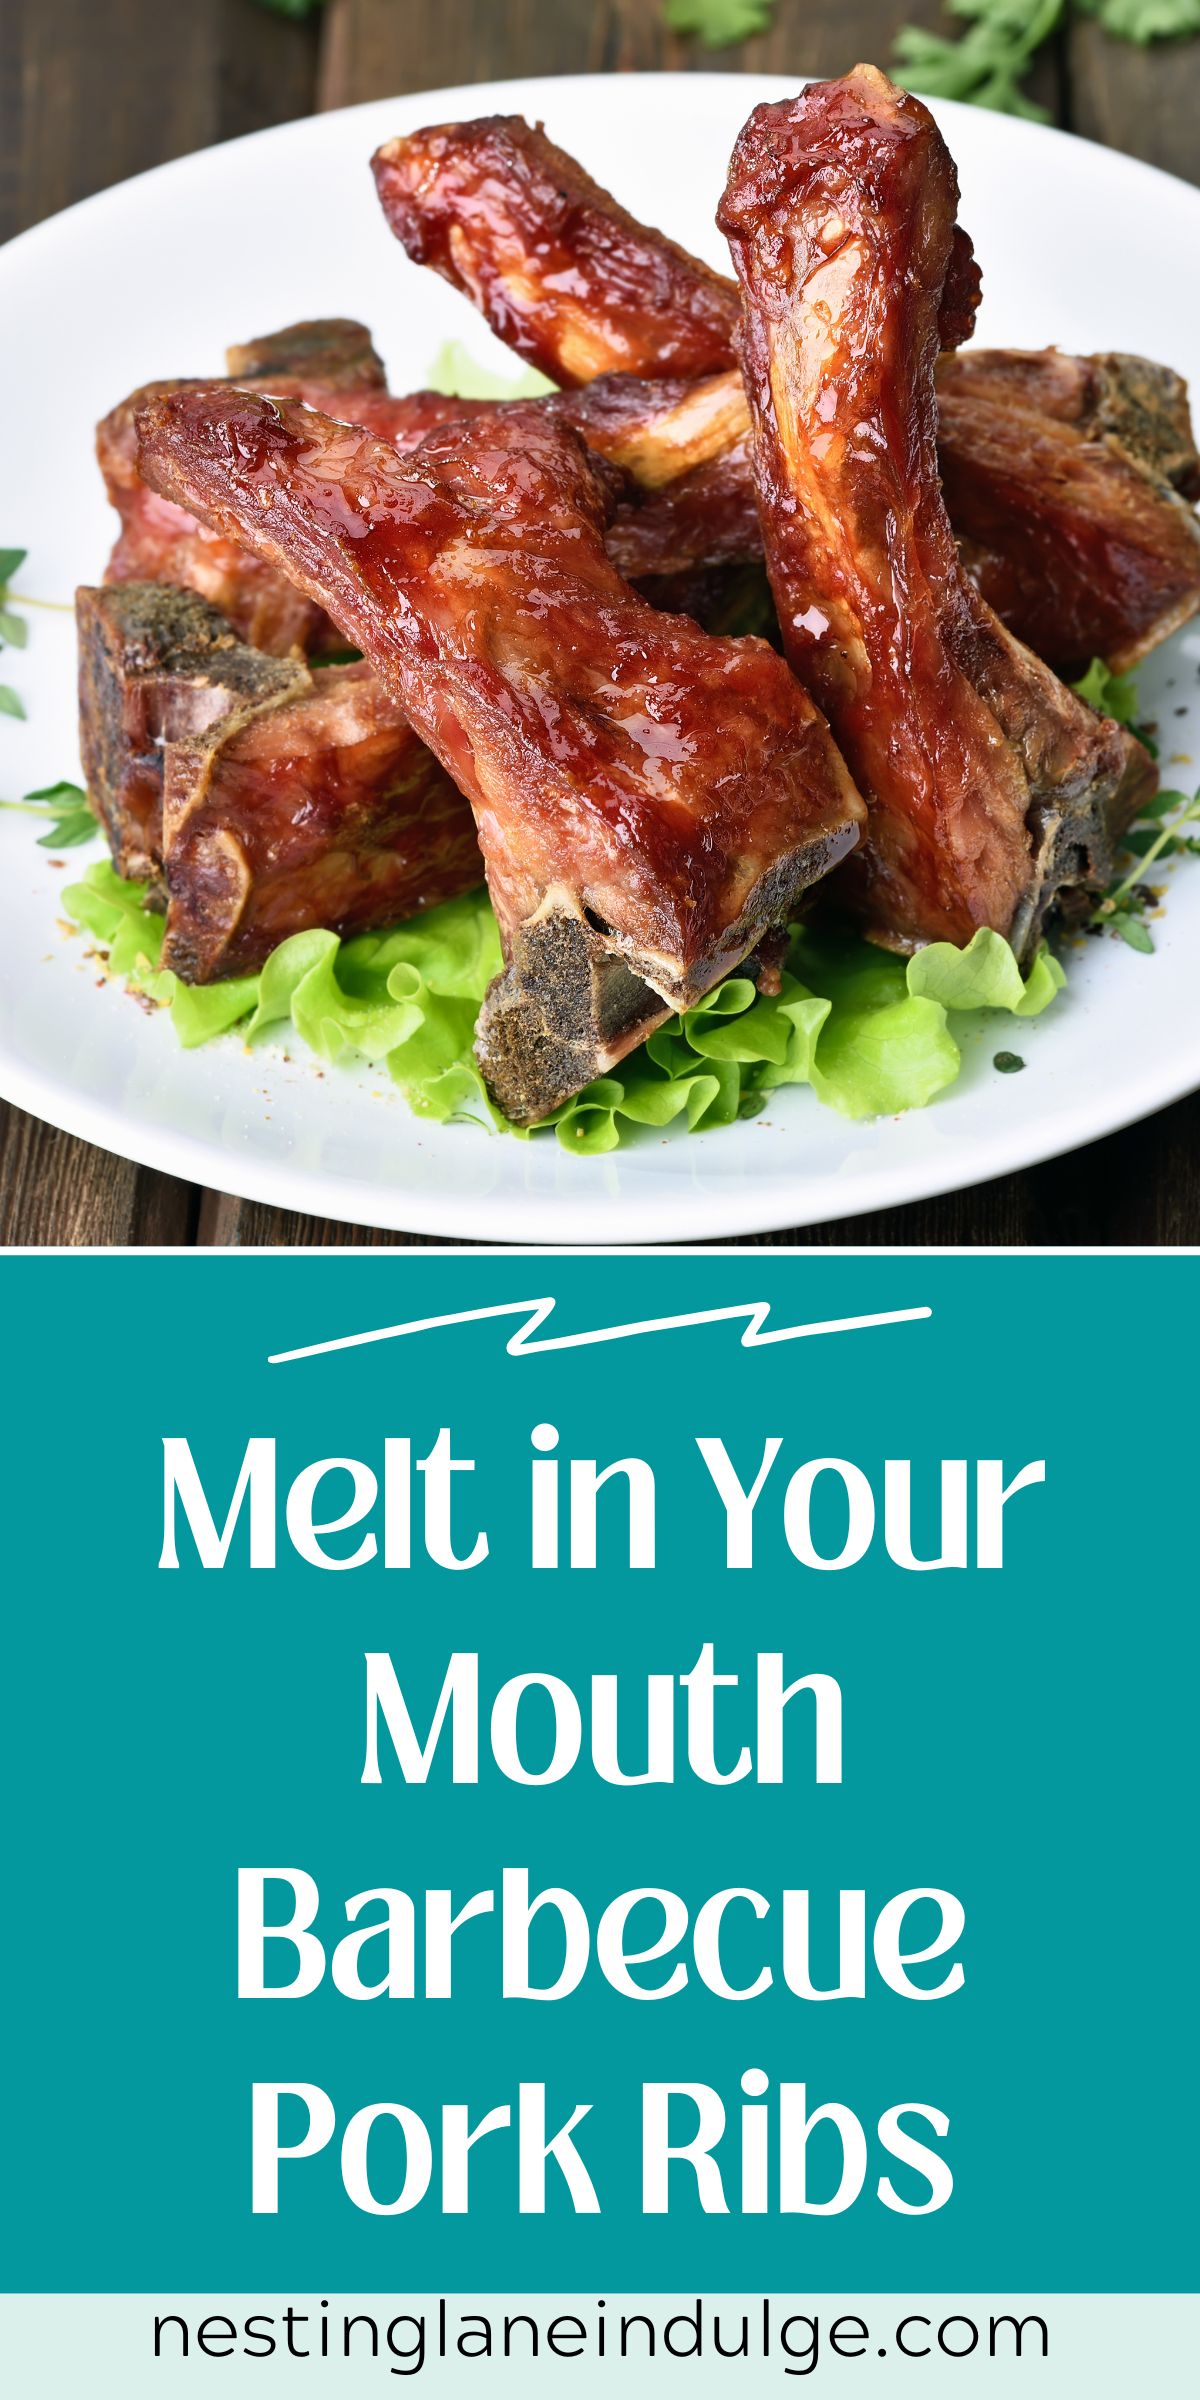 Graphic for Pinterest of Melt in Your Mouth Barbecue Pork Ribs Recipe.